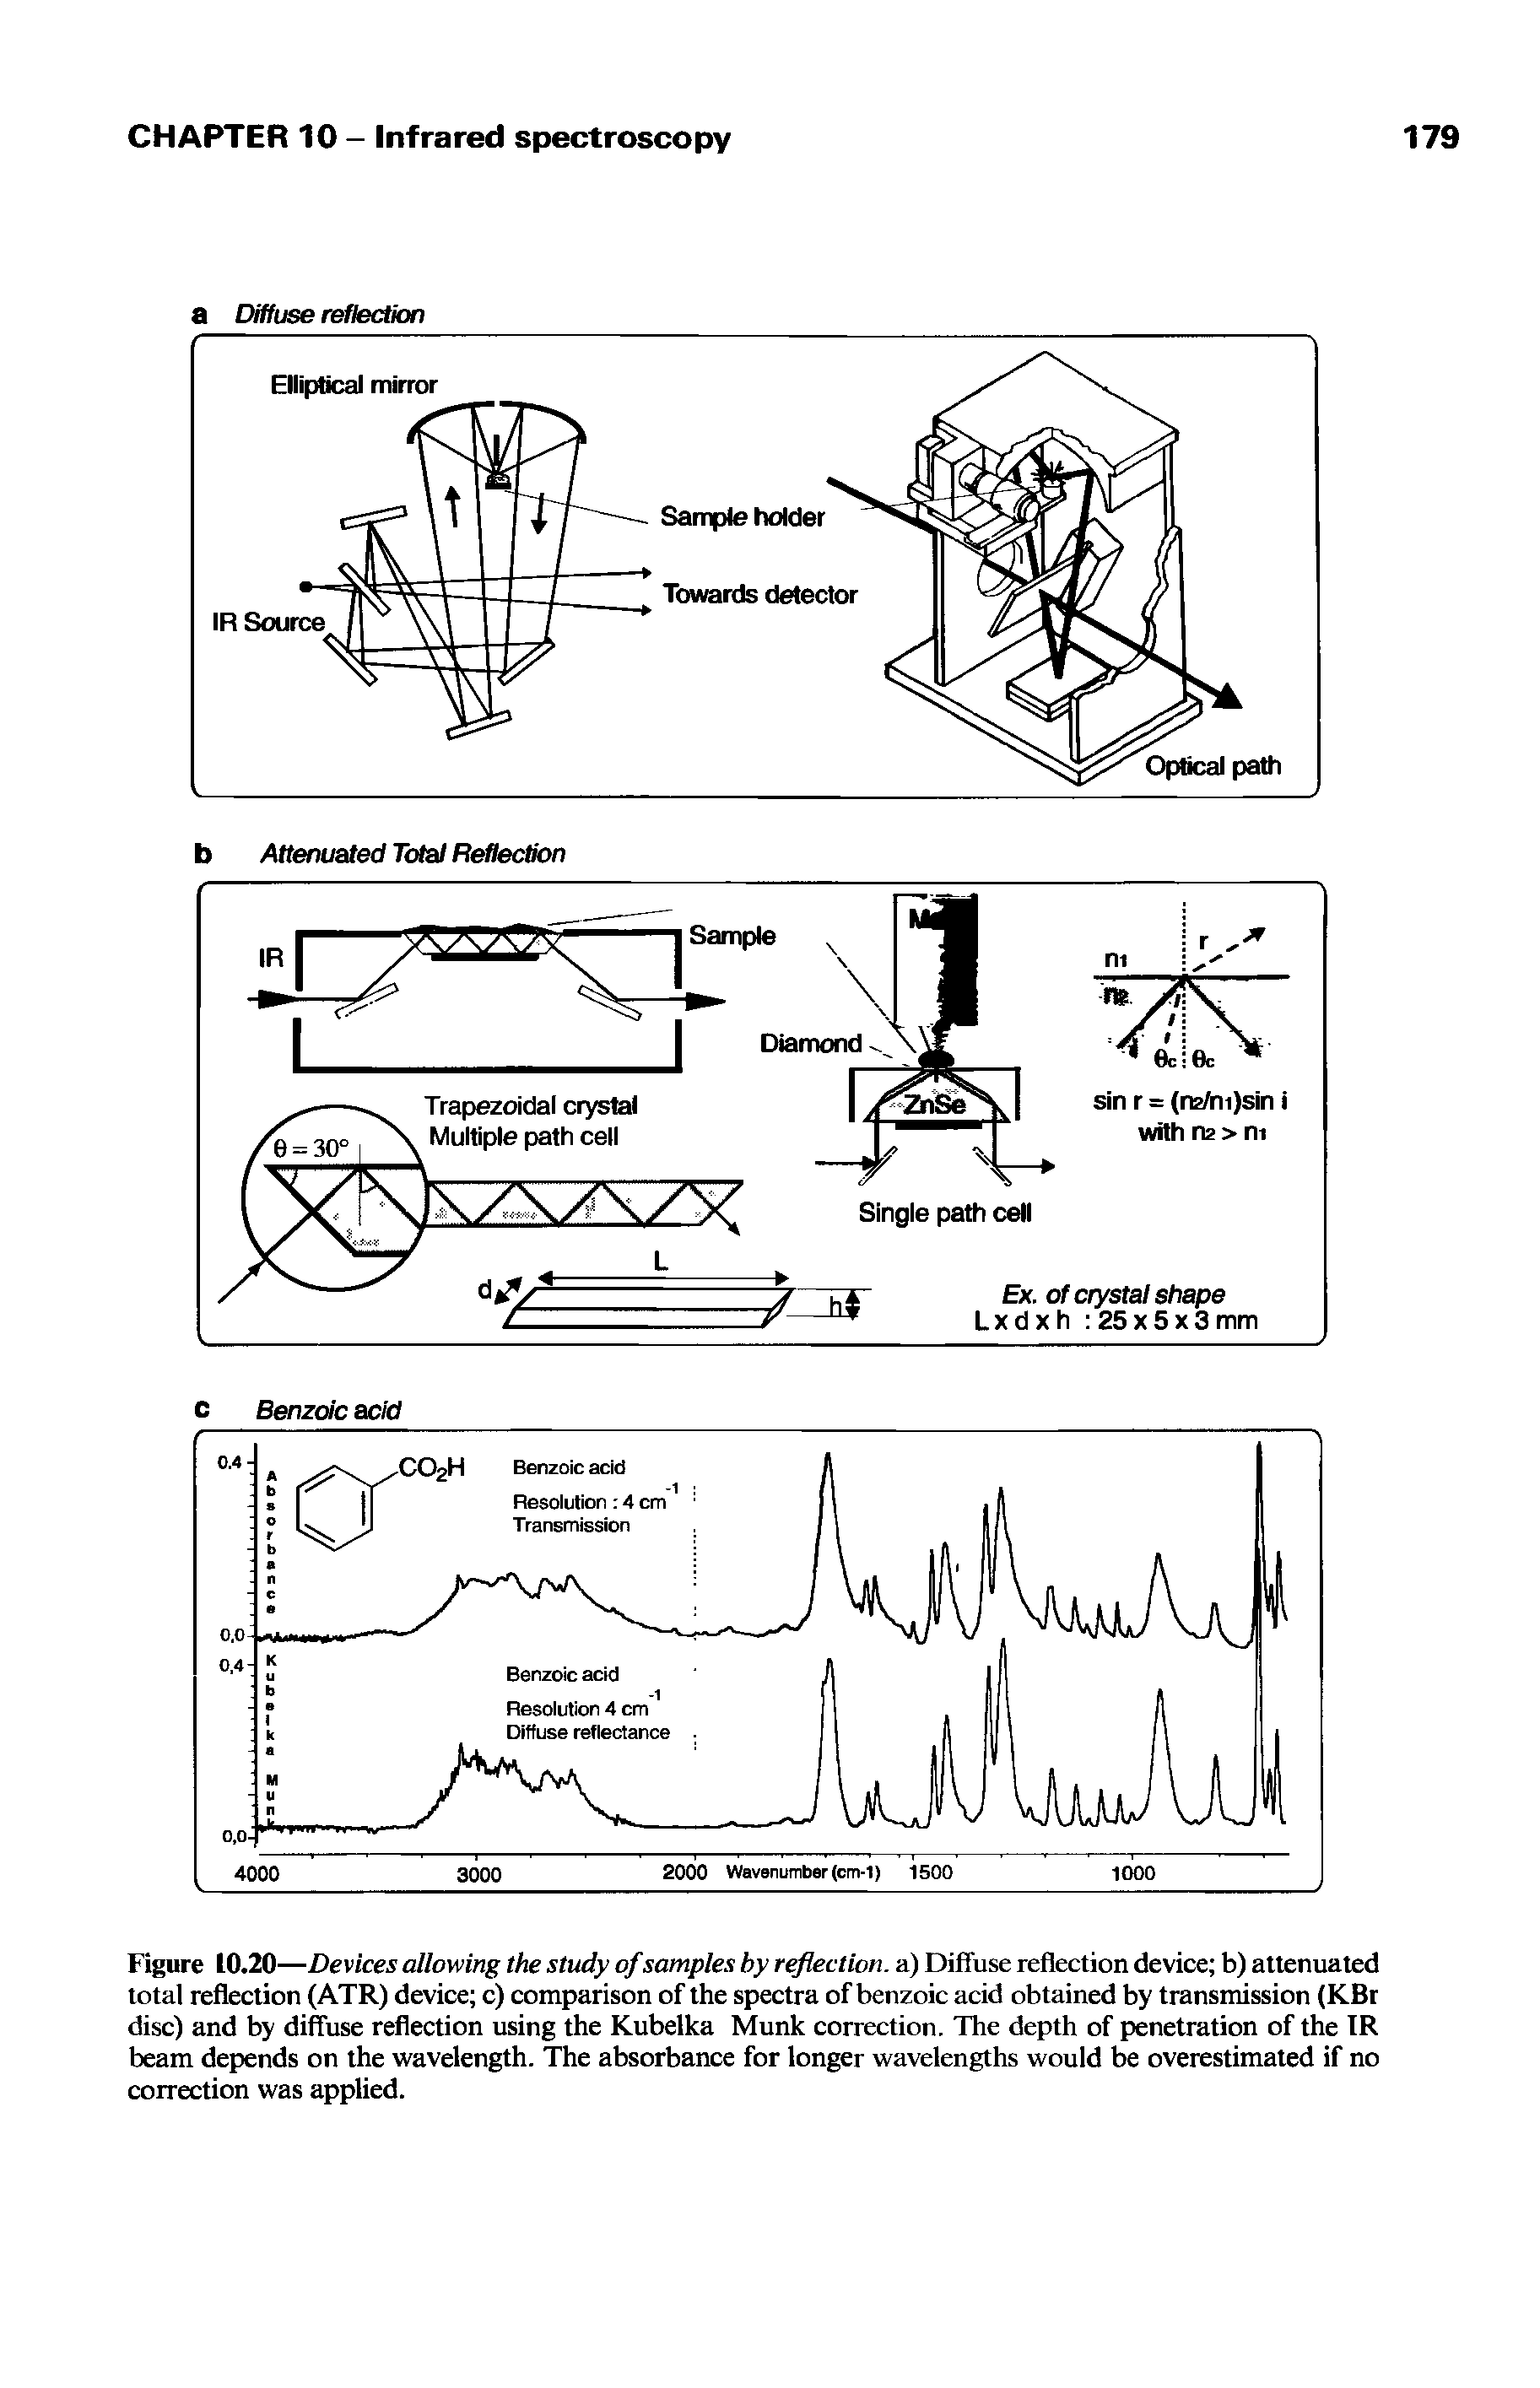 Figure 10.20—Devices allowing the study of samples by reflection, a) Diffuse reflection device b) attenuated total reflection (ATR) device c) comparison of the spectra of benzoic acid obtained by transmission (KBr disc) and by diffuse reflection using the Kubelka Munk correction. The depth of penetration of the IR beam depends on the wavelength. The absorbance for longer wavelengths would be overestimated if no correction was applied.